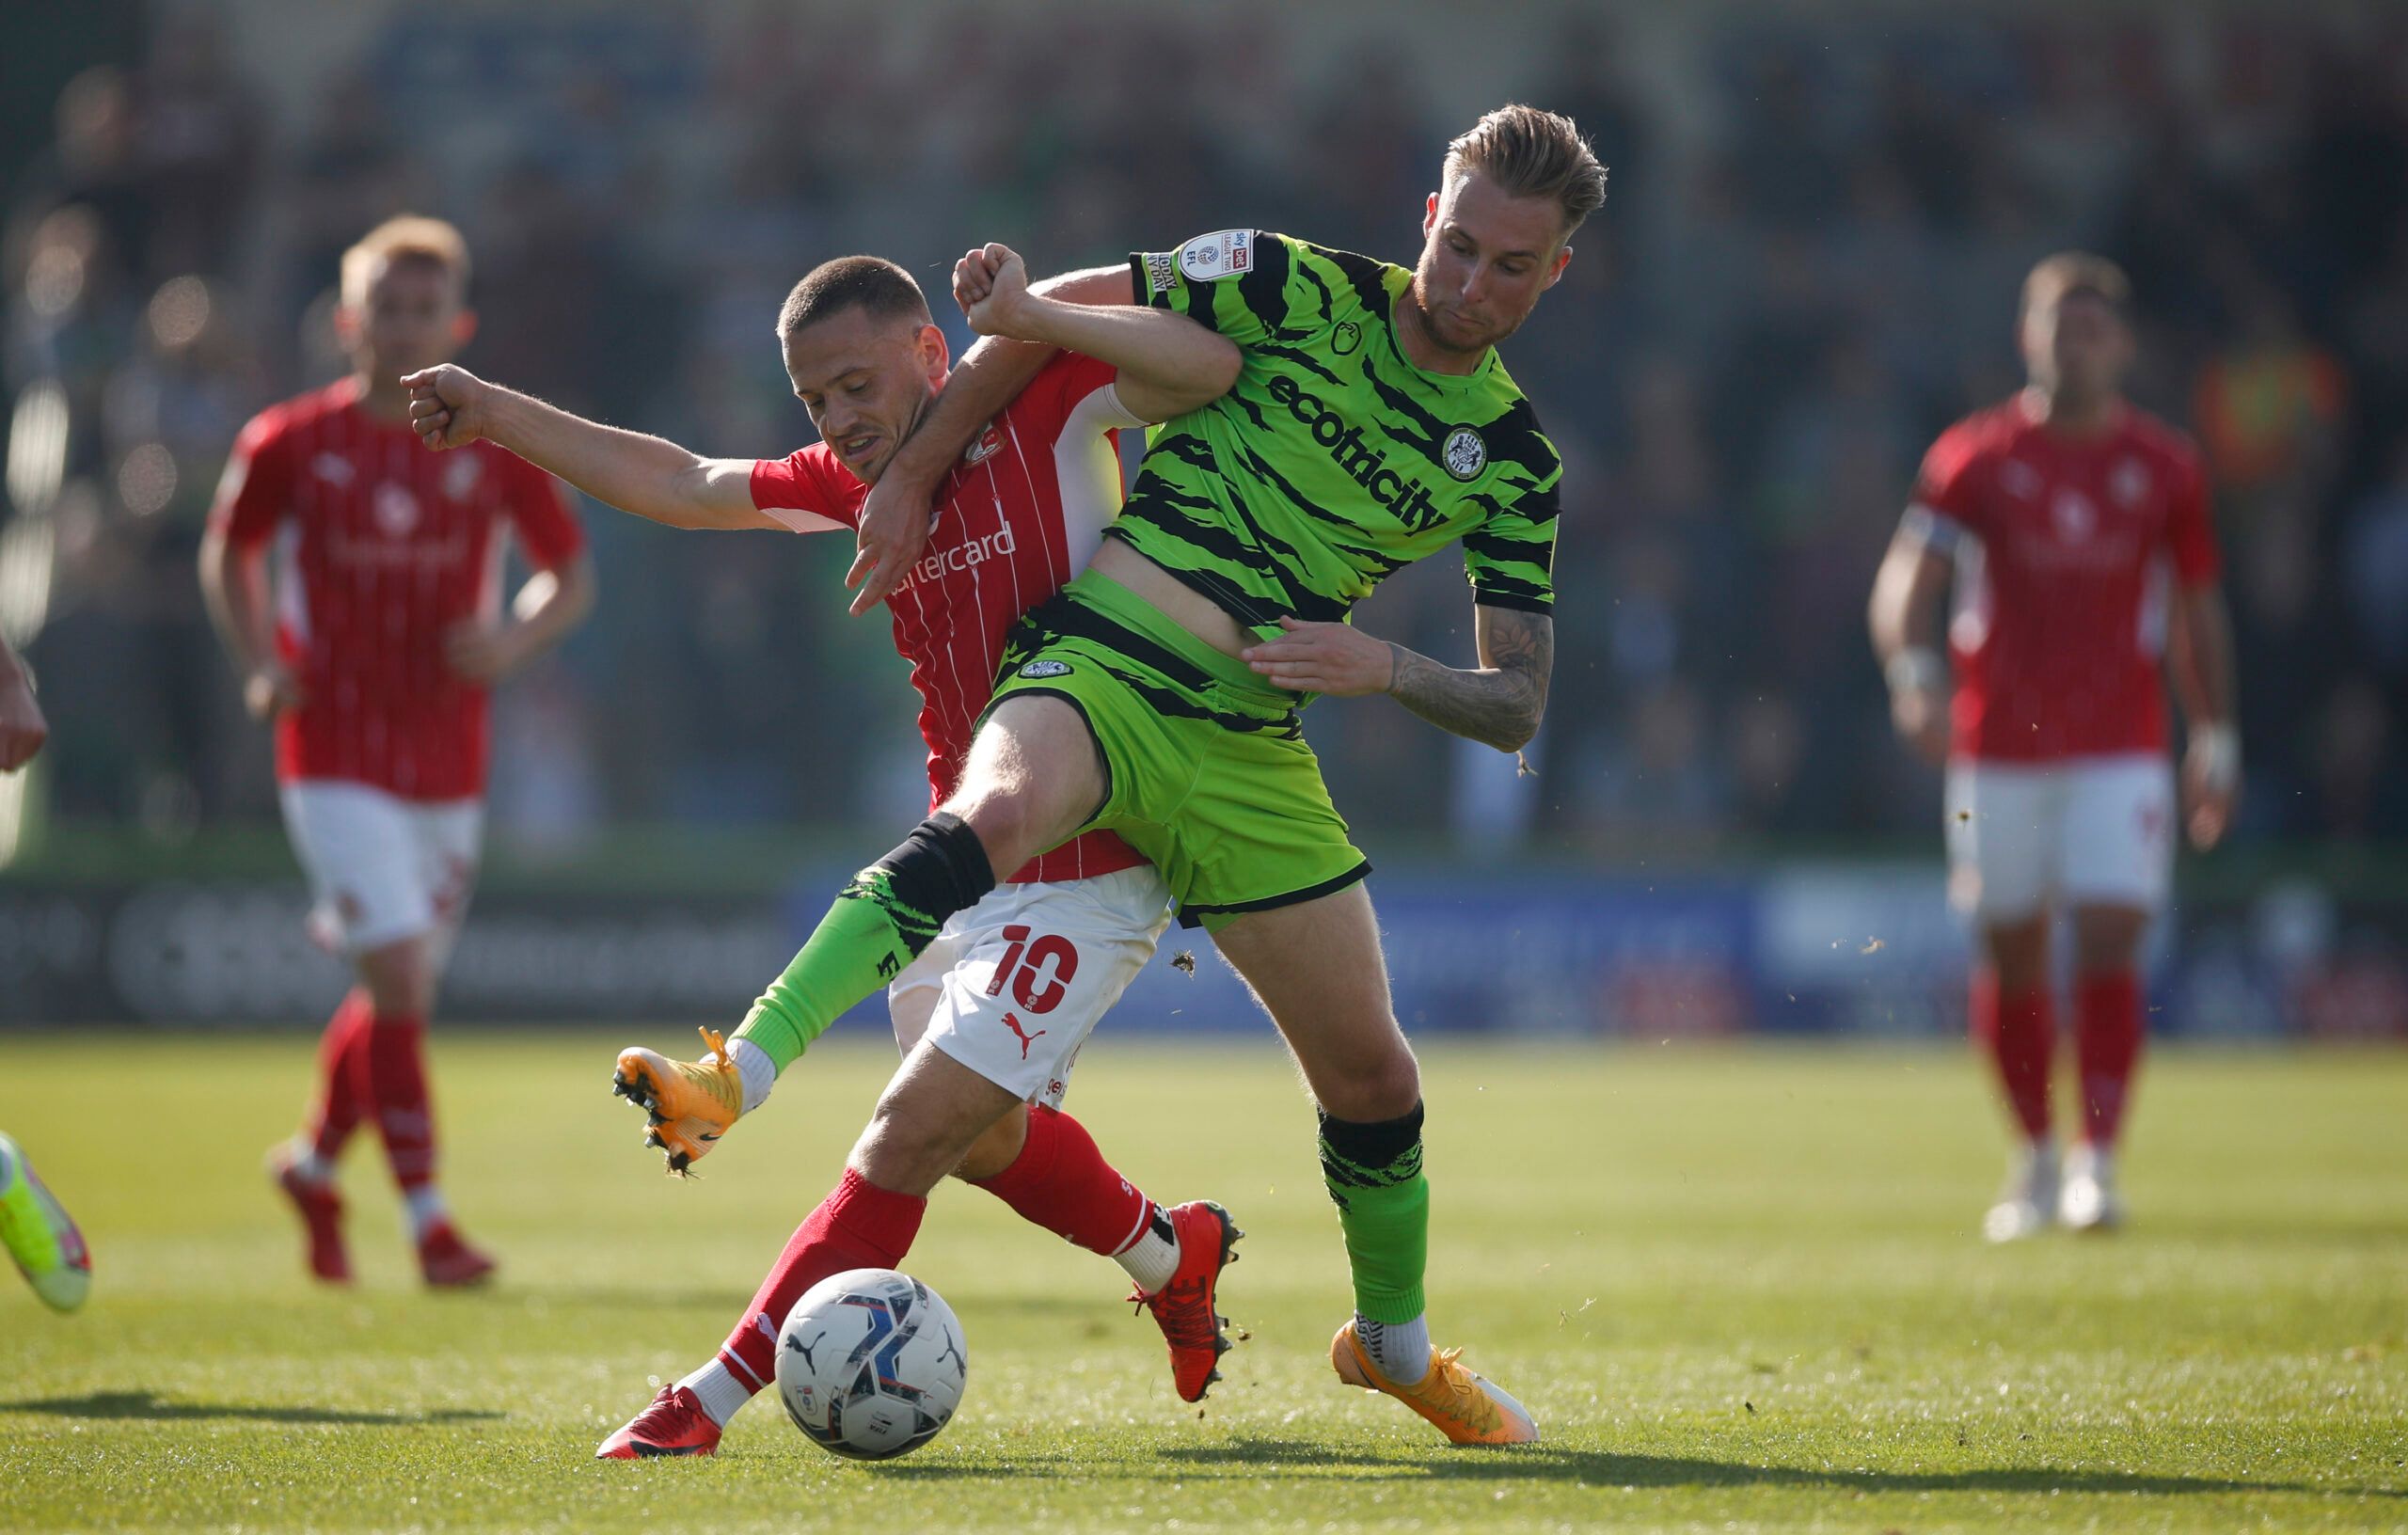 Soccer Football - League Two - Forest Green Rovers v Swindon Town - The New Lawn Stadium, Nailsworth, Britain - October 9, 2021 Forest Green Rovers’ Ben Stevenson in action with Swindon Town’s Jack Payne Action Images/Matthew Childs EDITORIAL USE ONLY. No use with unauthorized audio, video, data, fixture lists, club/league logos or 'live' services. Online in-match use limited to 75 images, no video emulation. No use in betting, games or single club /league/player publications.  Please contact yo